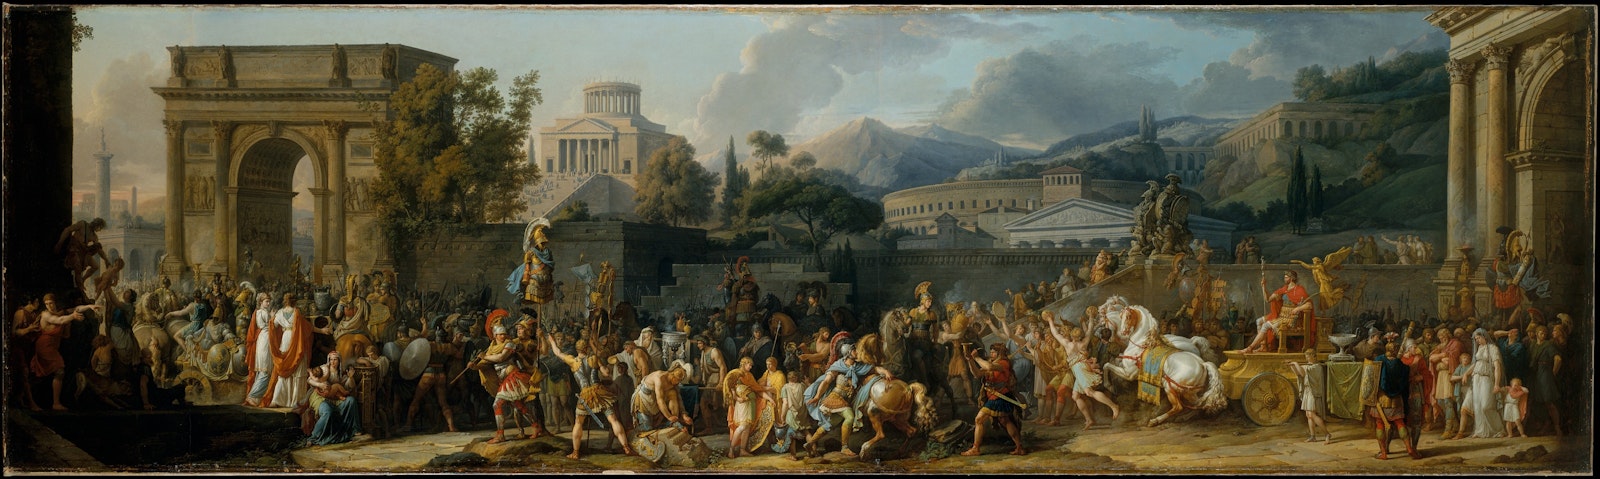 The Triumph of Aemilius Paulus over King Perseus of Macedon Painting by Carle Vernet 1789 The Met